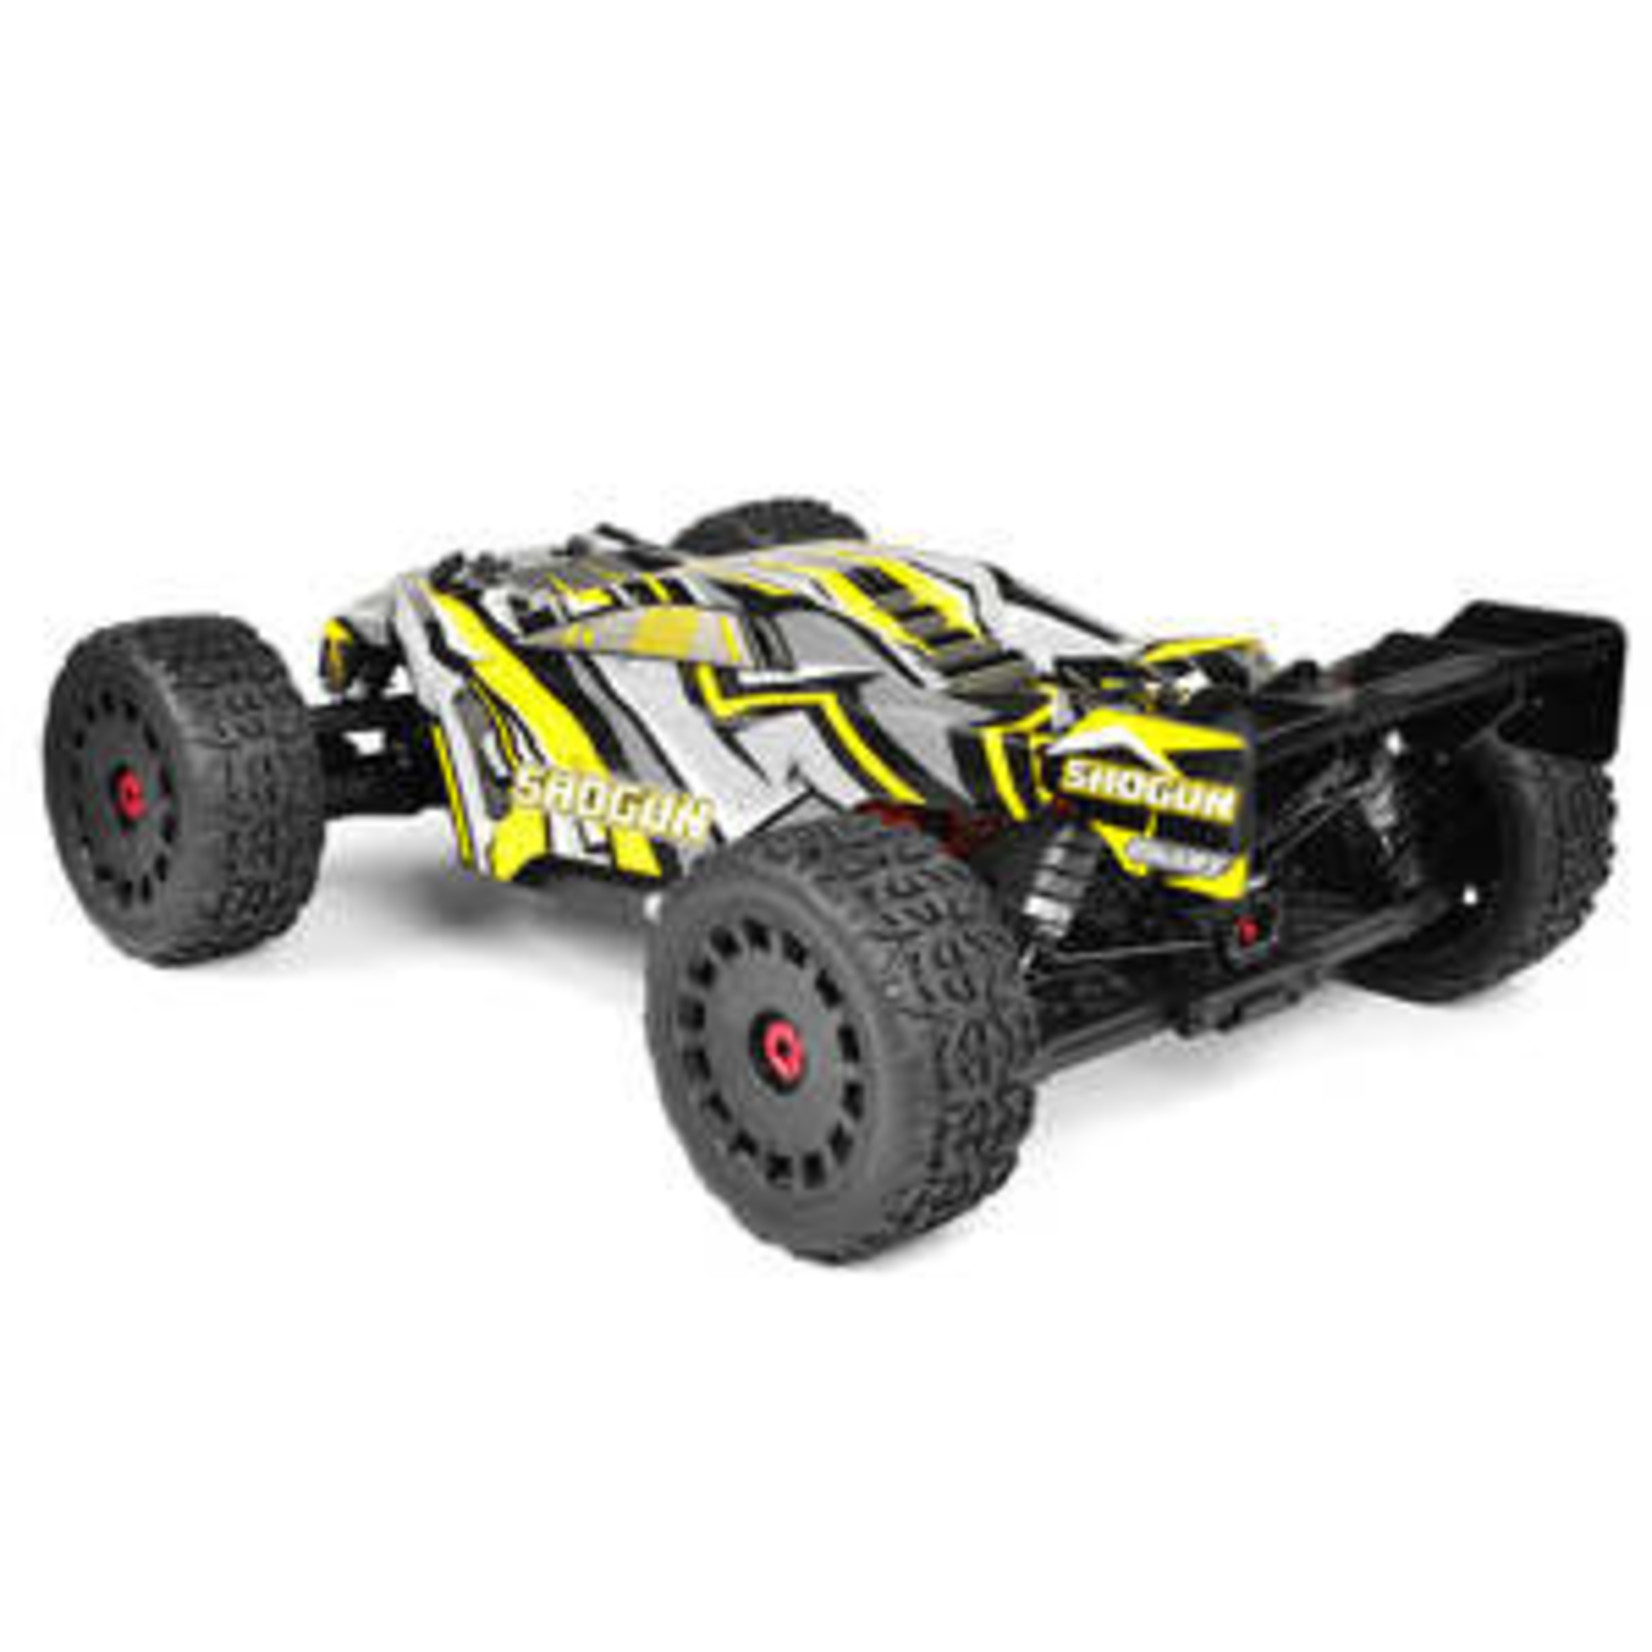 Corally (Team Corally) C-00177  1/8 Shogun XP 4WD Truggy 6S Brushless RTR (No Battery or Charger)